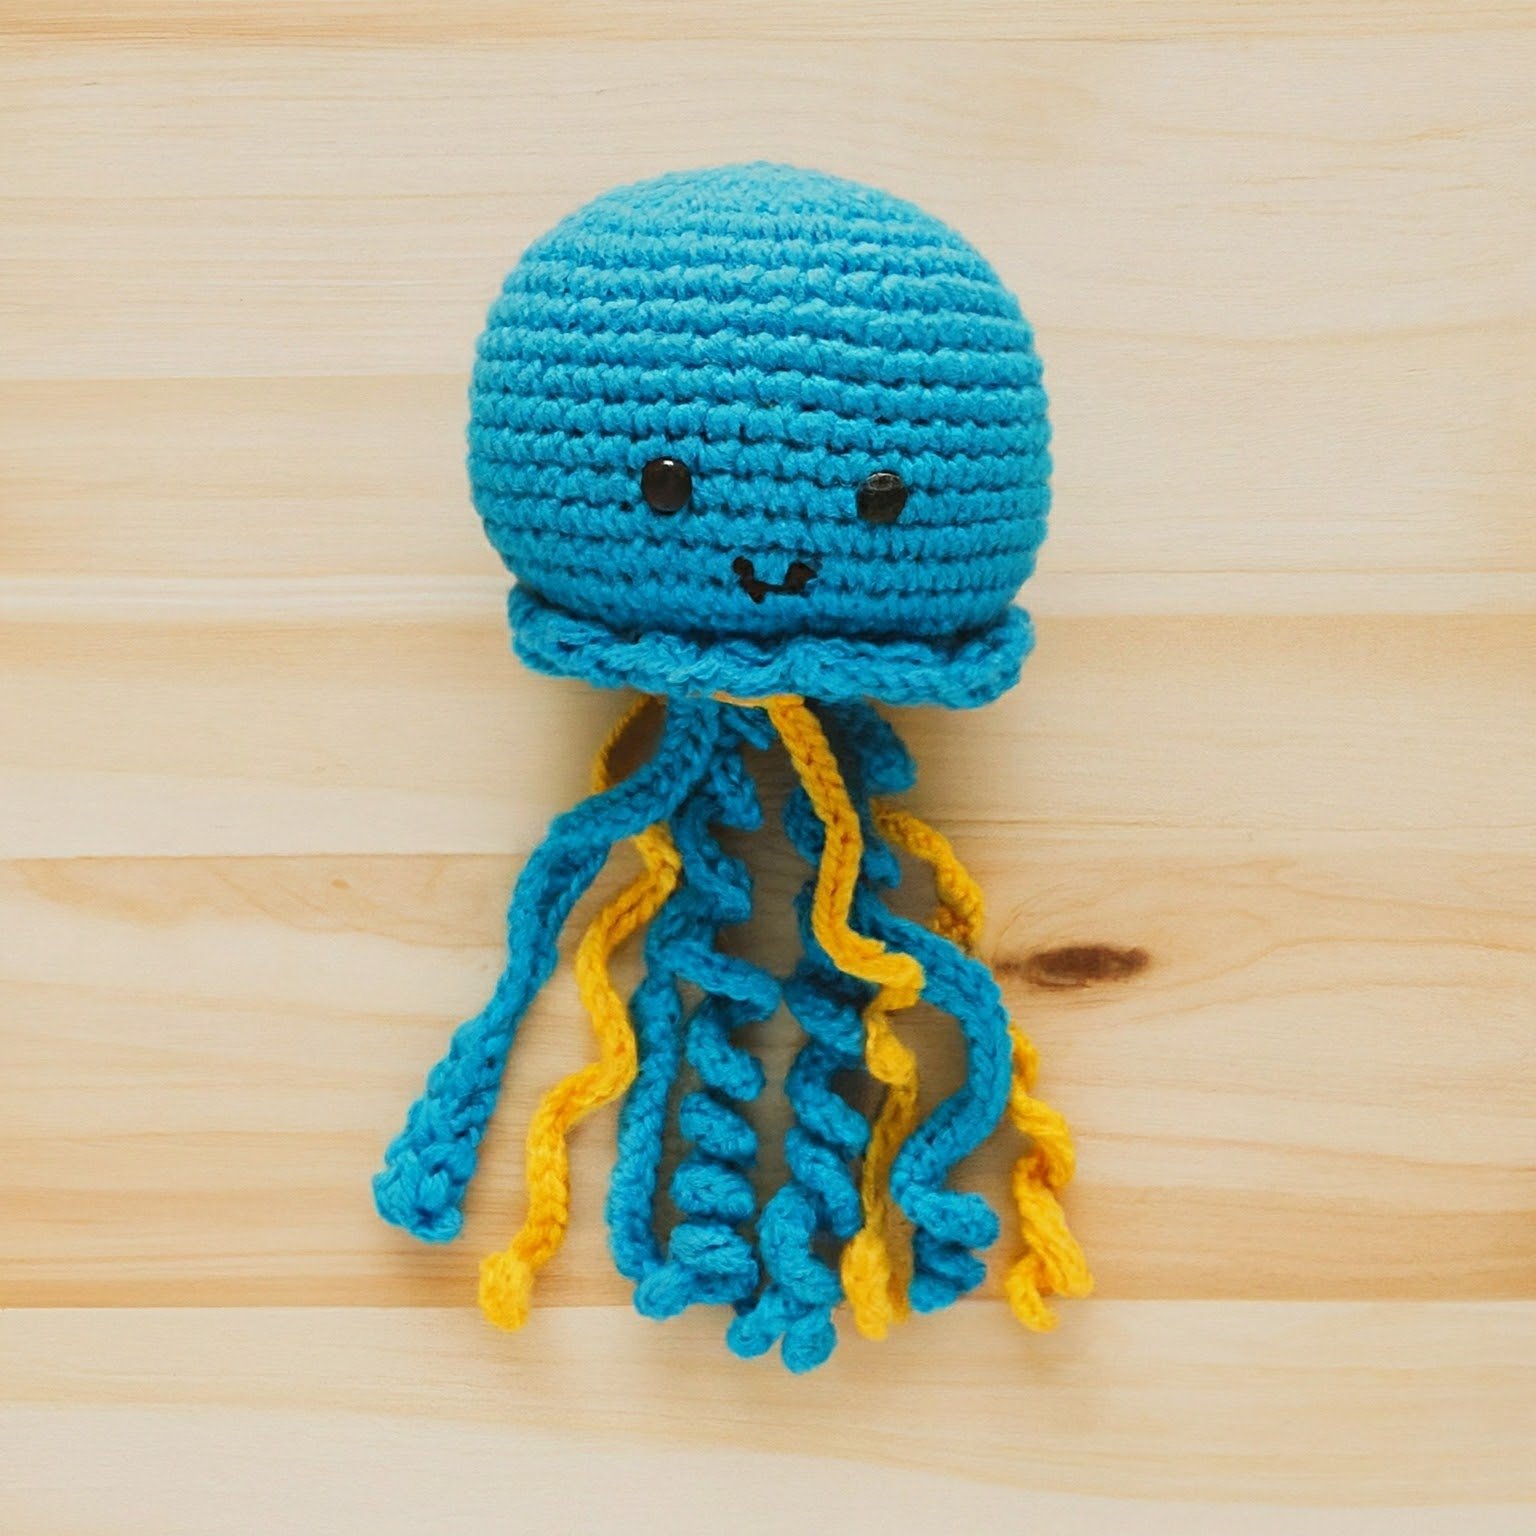 a cute jellyfish made with blue and yellow yarn, on light plywood table, overhead birds eye view